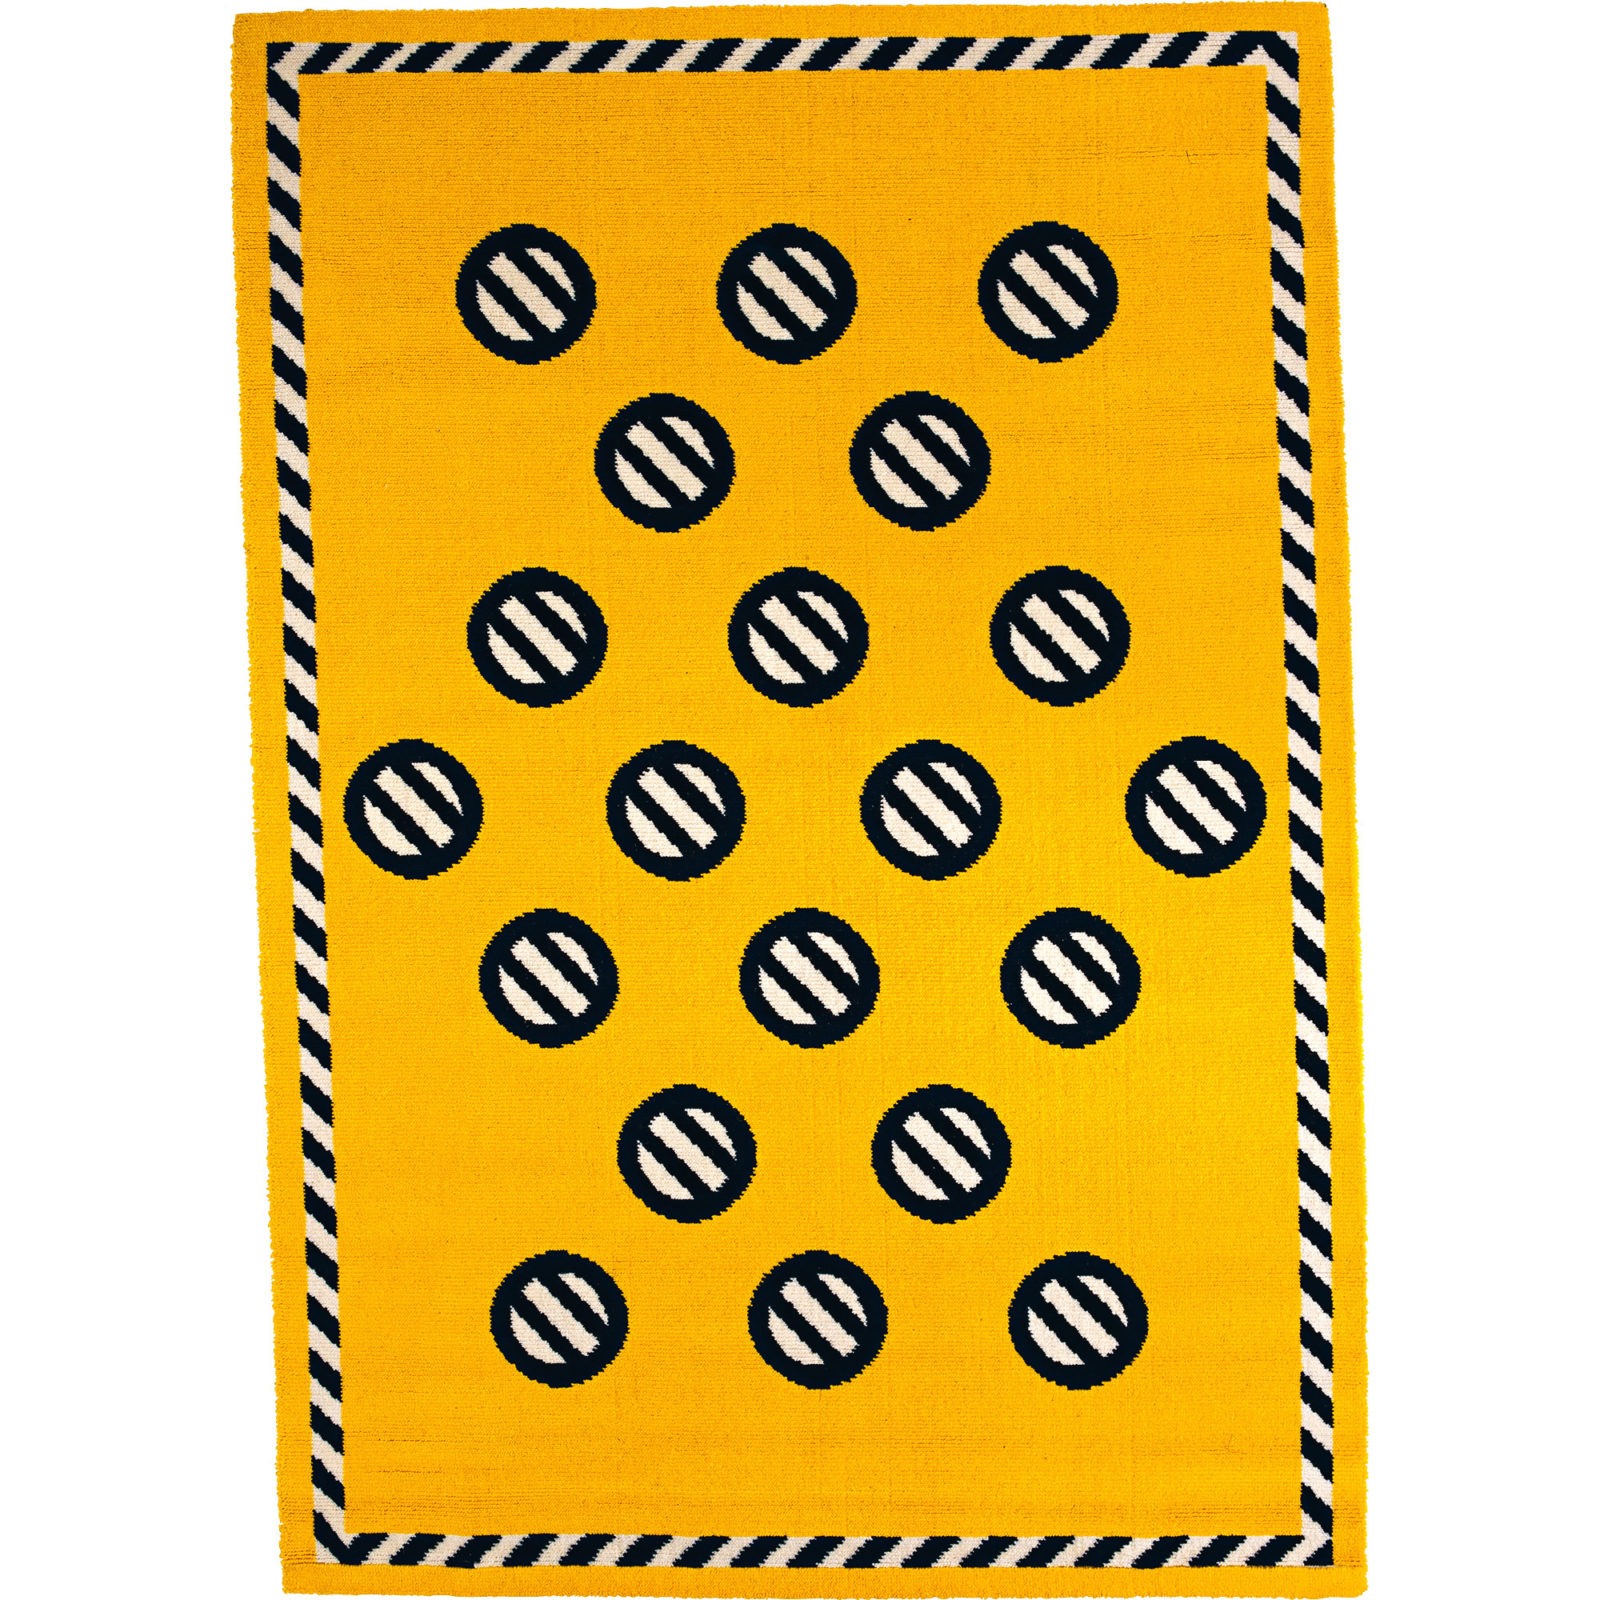 Yellow rug decorated with pattern of black and white stripes, GIFTIG.